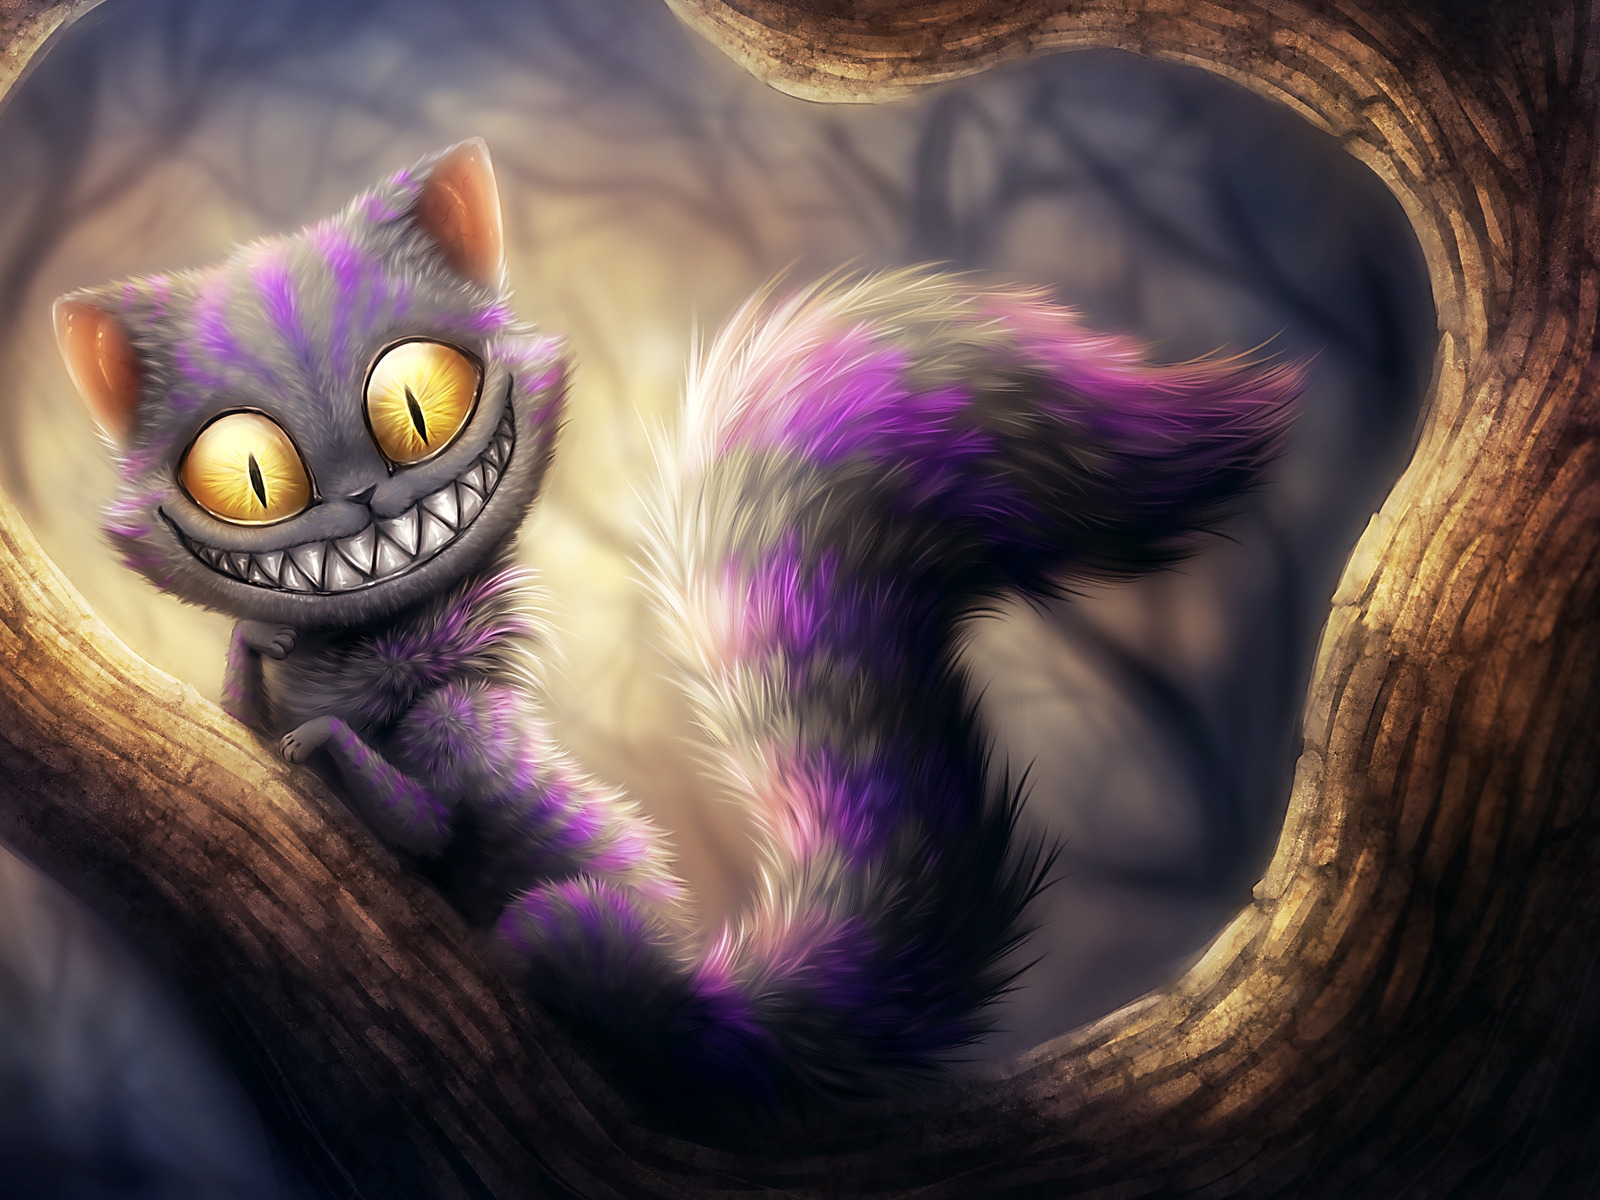 Cheshire Cat from Alice Adventures in Wonderland for 1600 x 1200 resolution